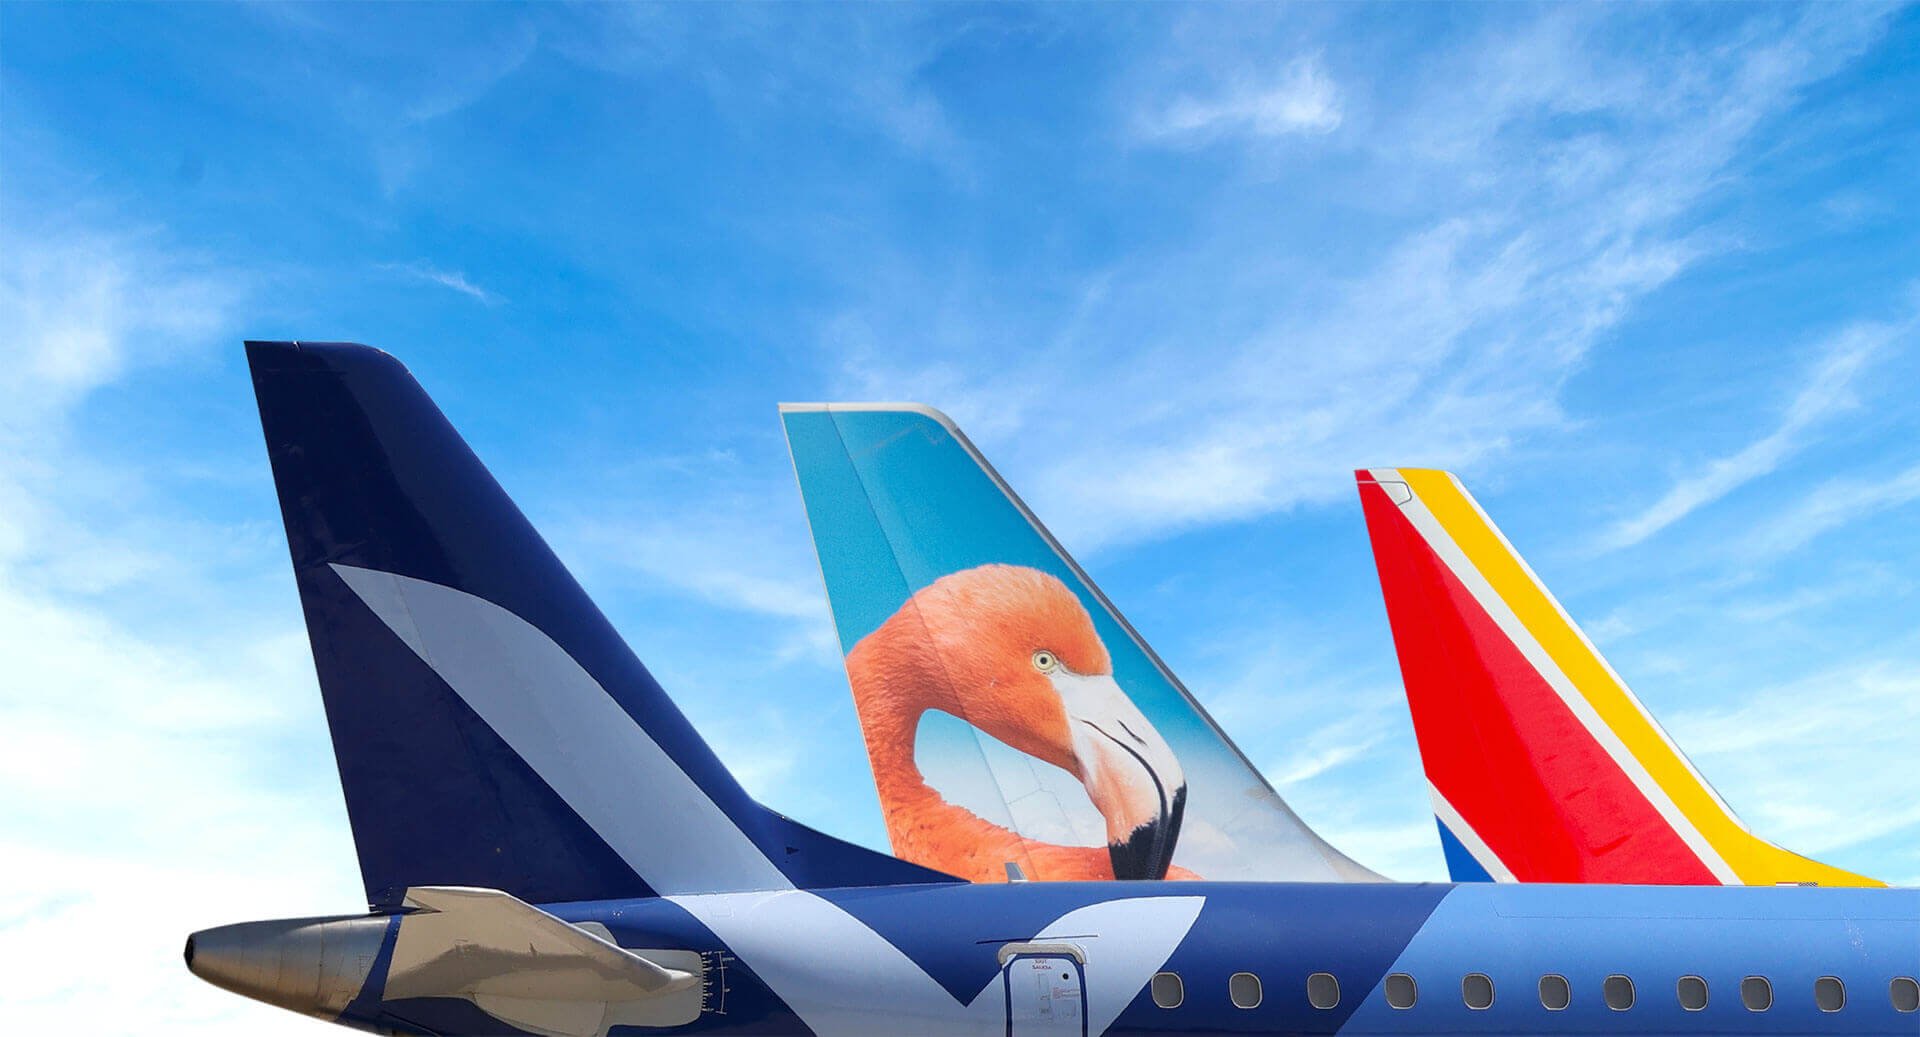 Airplanes lined up at airport with blue sky in the background